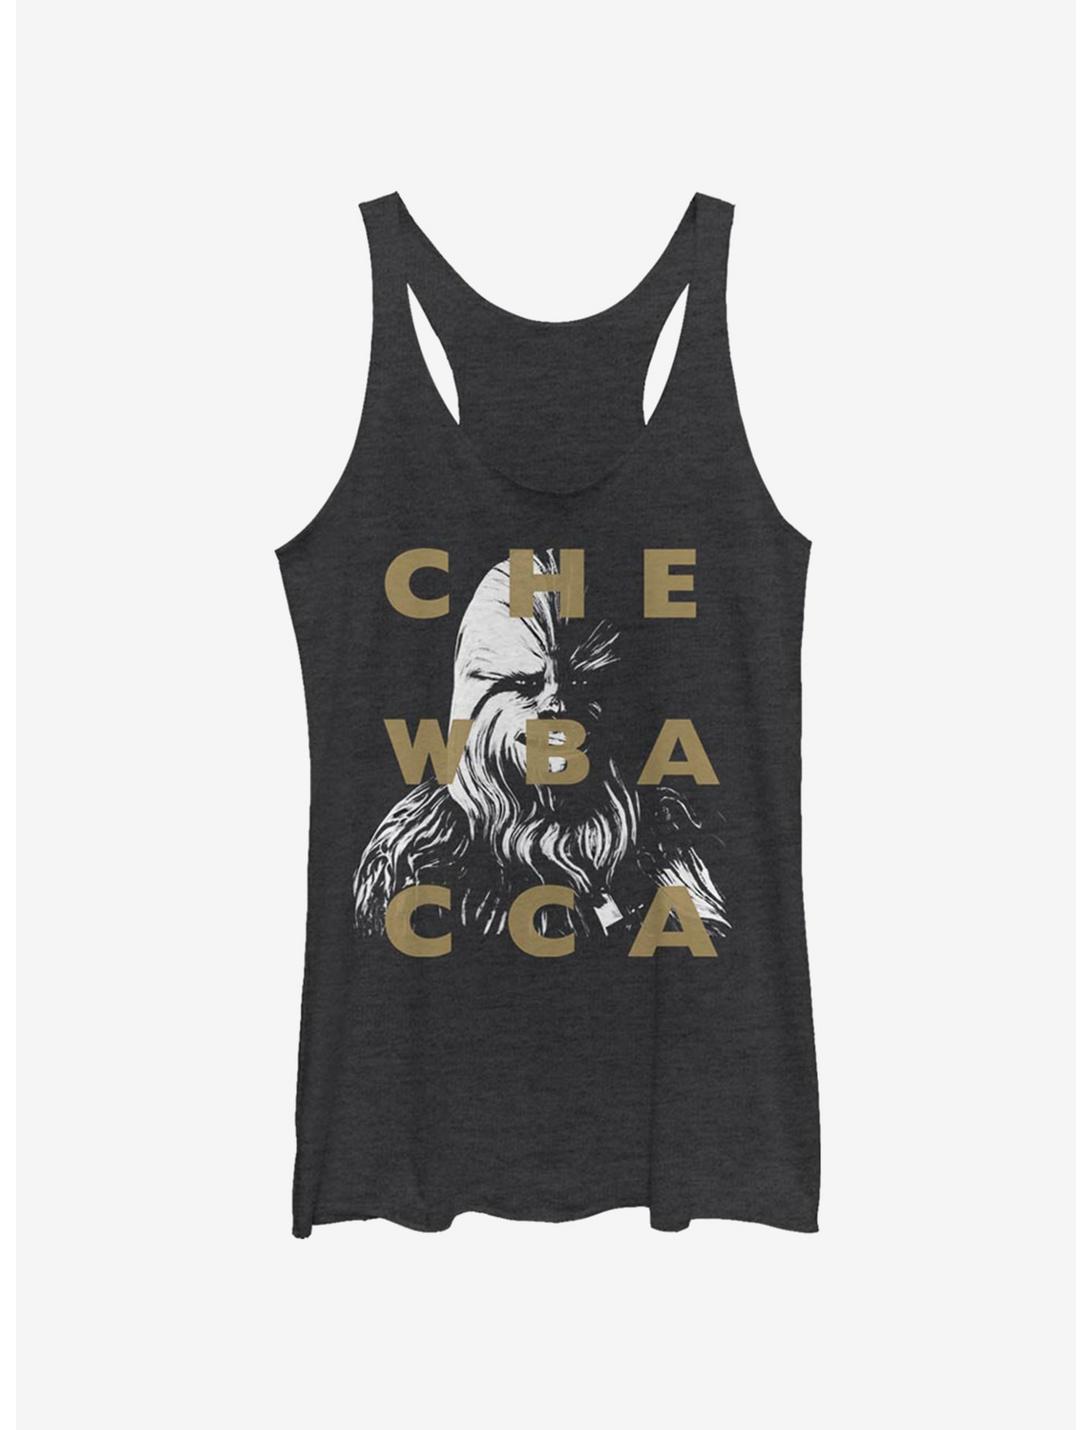 Star Wars The Clone Wars Chewy Text Girls Tank, BLK HTR, hi-res